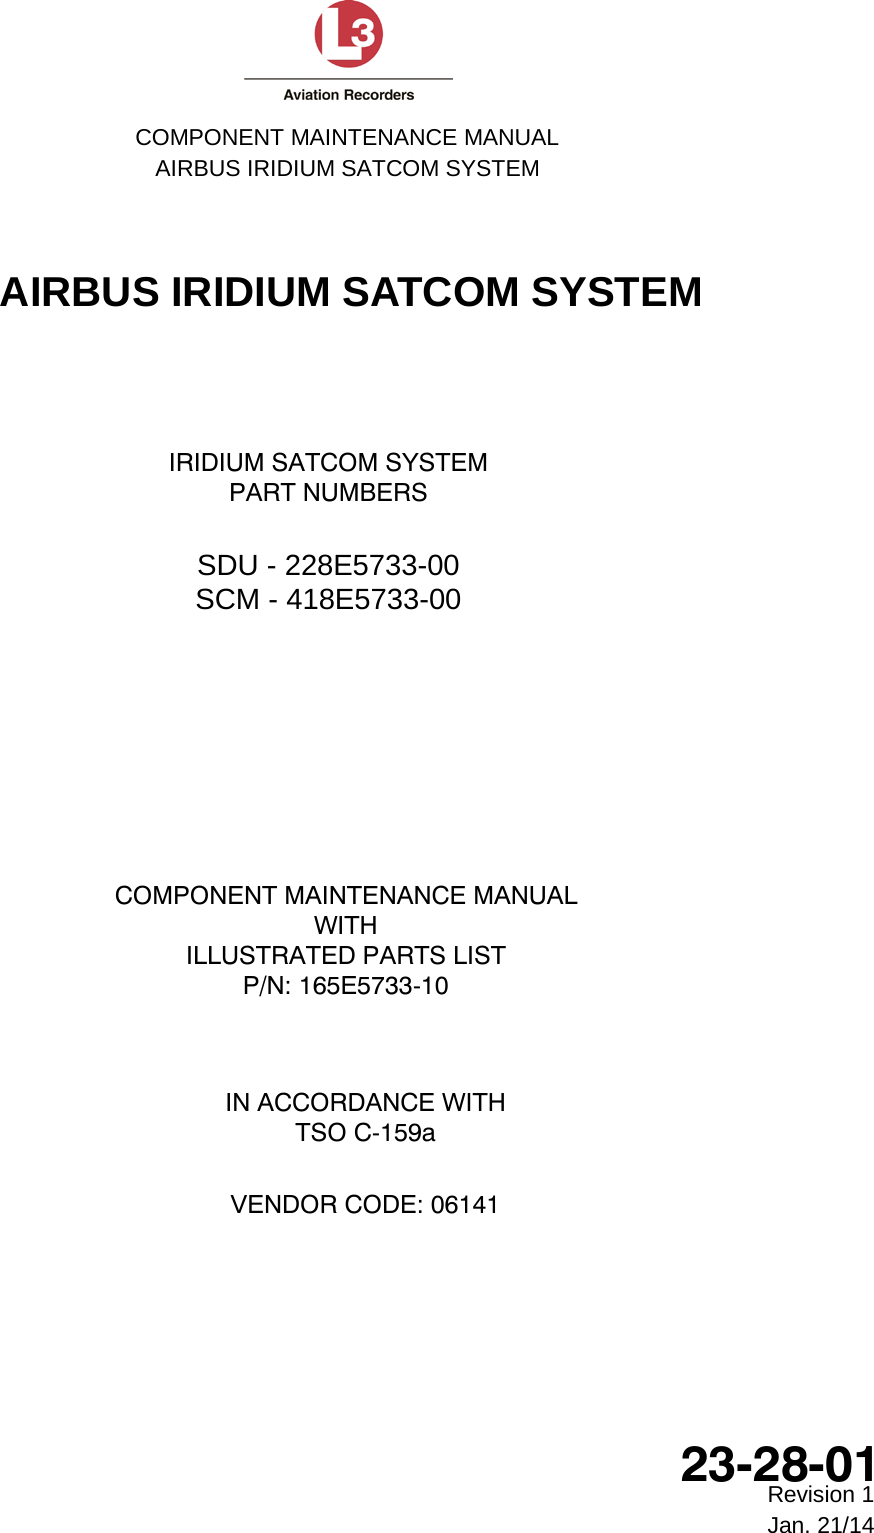   COMPONENT MAINTENANCE MANUAL AIRBUS IRIDIUM SATCOM SYSTEM  AIRBUS IRIDIUM SATCOM SYSTEM IRIDIUM SATCOM SYSTEM  PART NUMBERS  SDU - 228E5733-00 SCM - 418E5733-00   COMPONENT MAINTENANCE MANUAL WITH  ILLUSTRATED PARTS LIST P/N: 165E5733-10 IN ACCORDANCE WITH TSO C-159a  VENDOR CODE: 06141  23-28-01 Revision 1 Jan. 21/14 